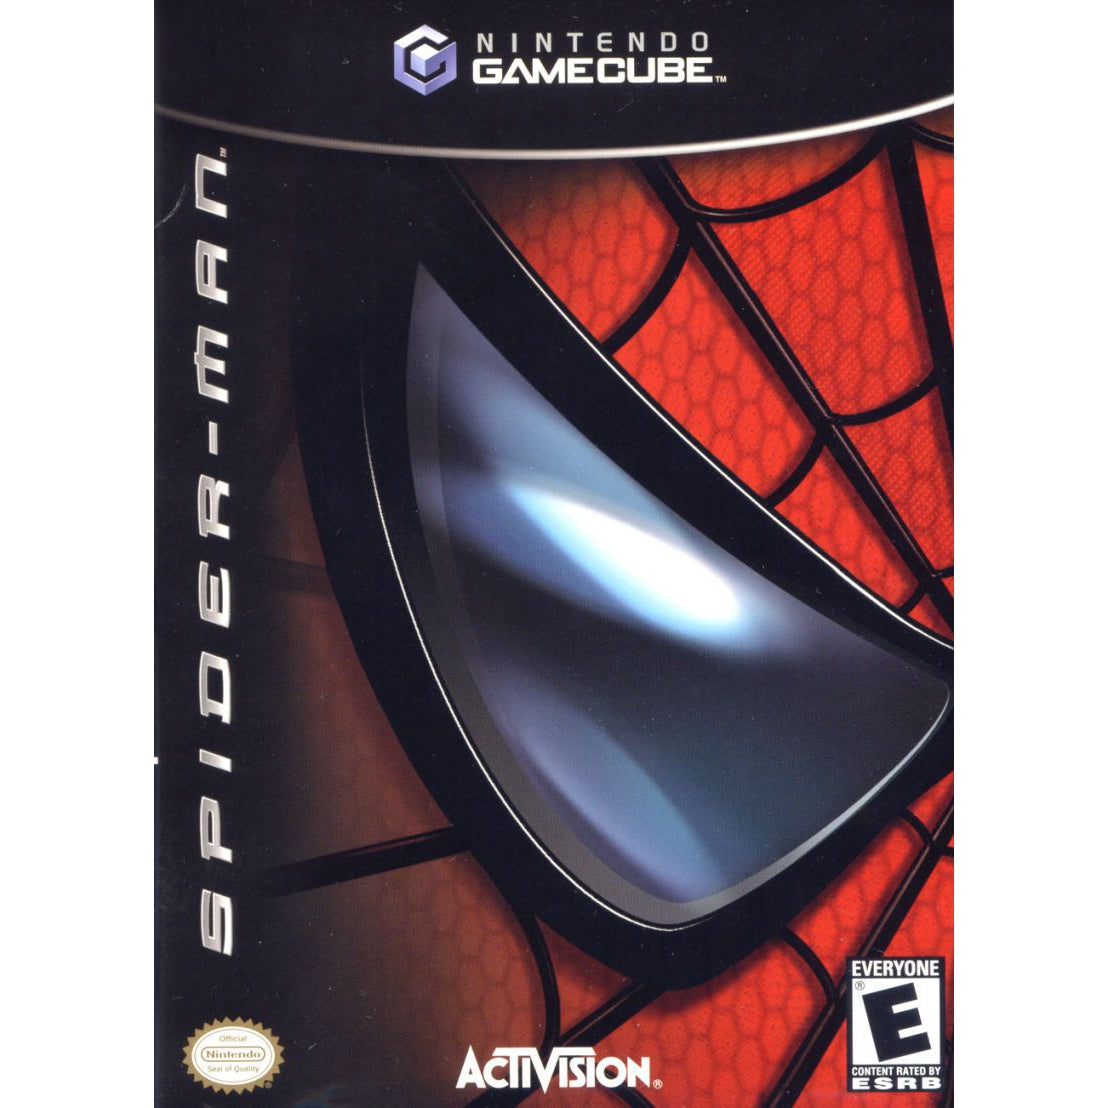 Spider-Man - GameCube Game - YourGamingShop.com - Buy, Sell, Trade Video Games Online. 120 Day Warranty. Satisfaction Guaranteed.